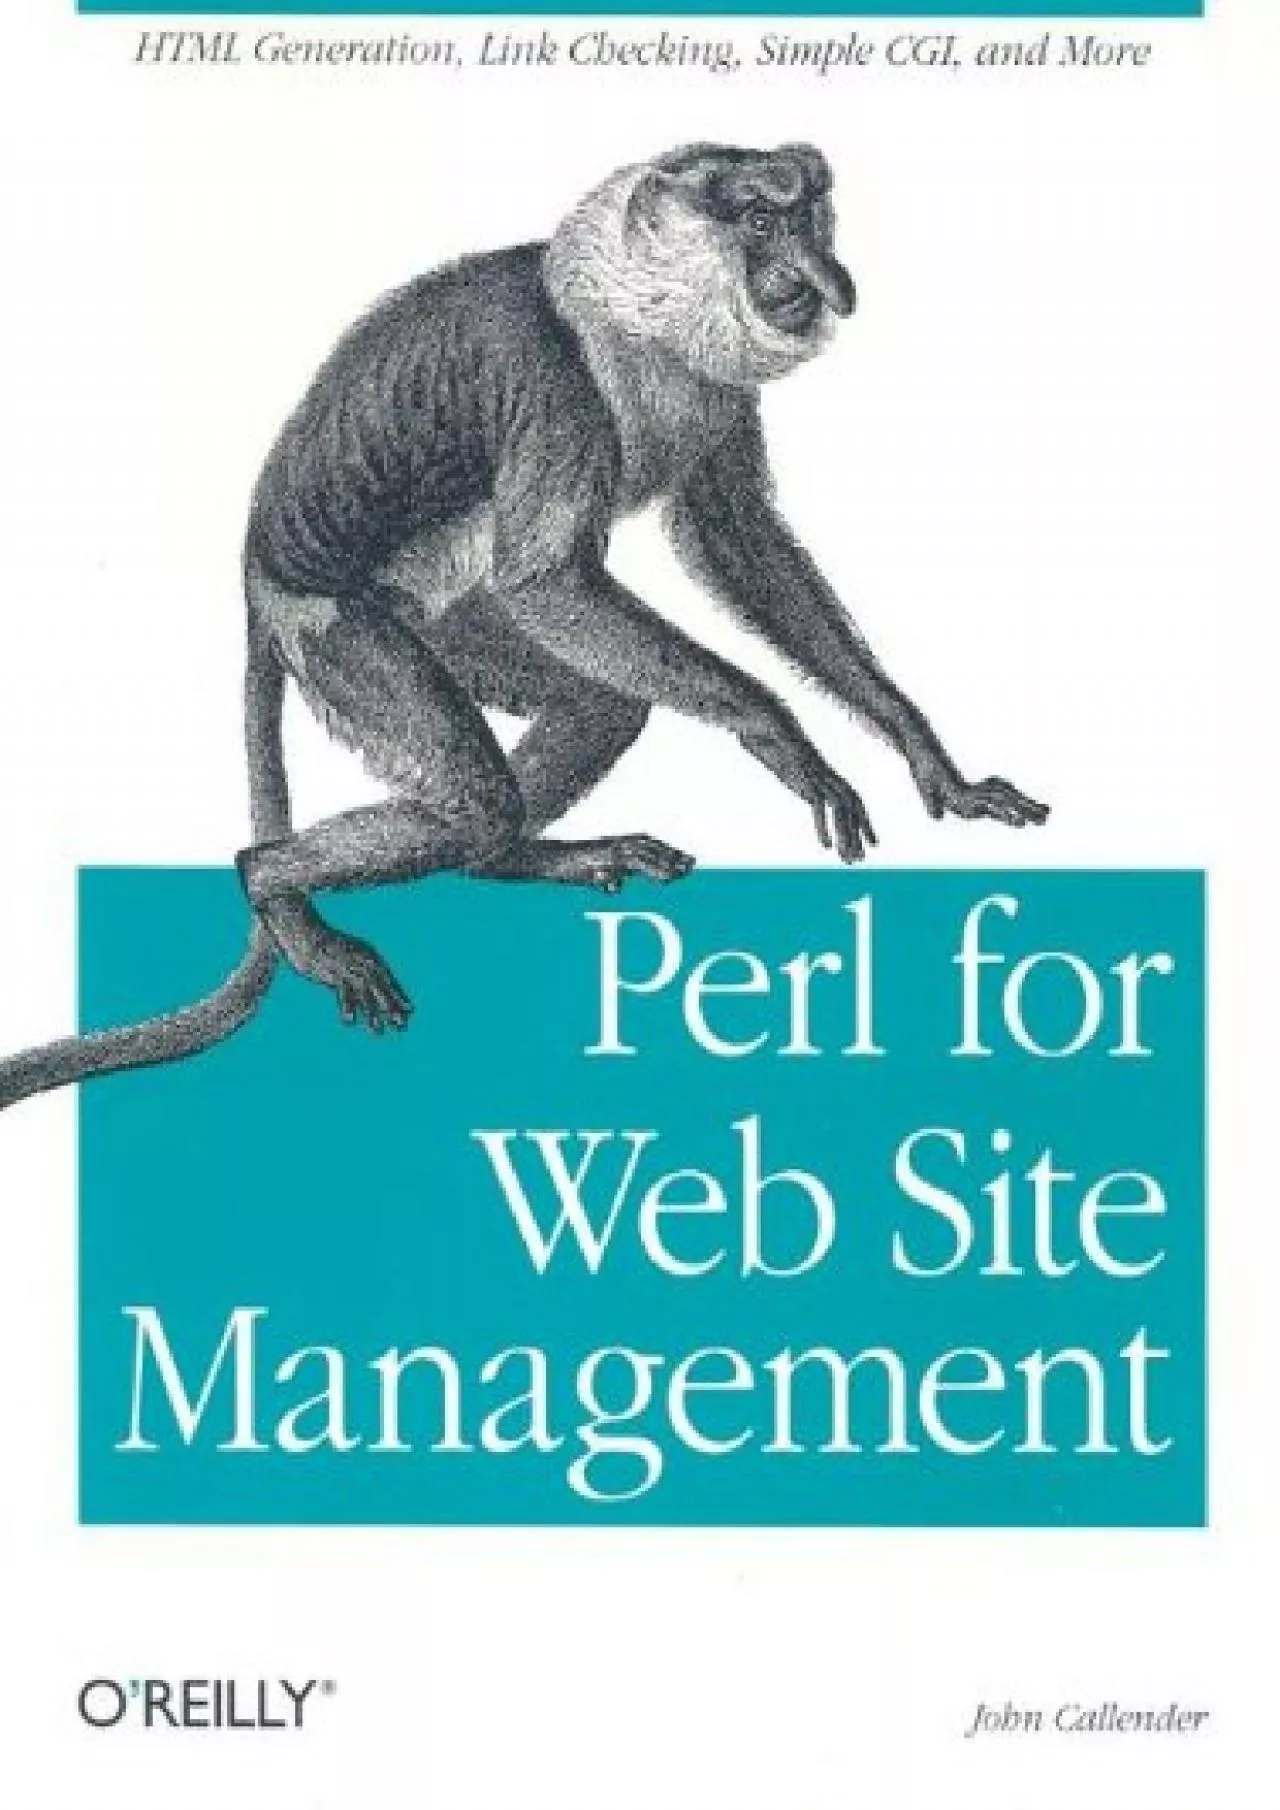 [READING BOOK]-Perl for Web Site Management: HTML Generation, Link Checking, Simple CGI,